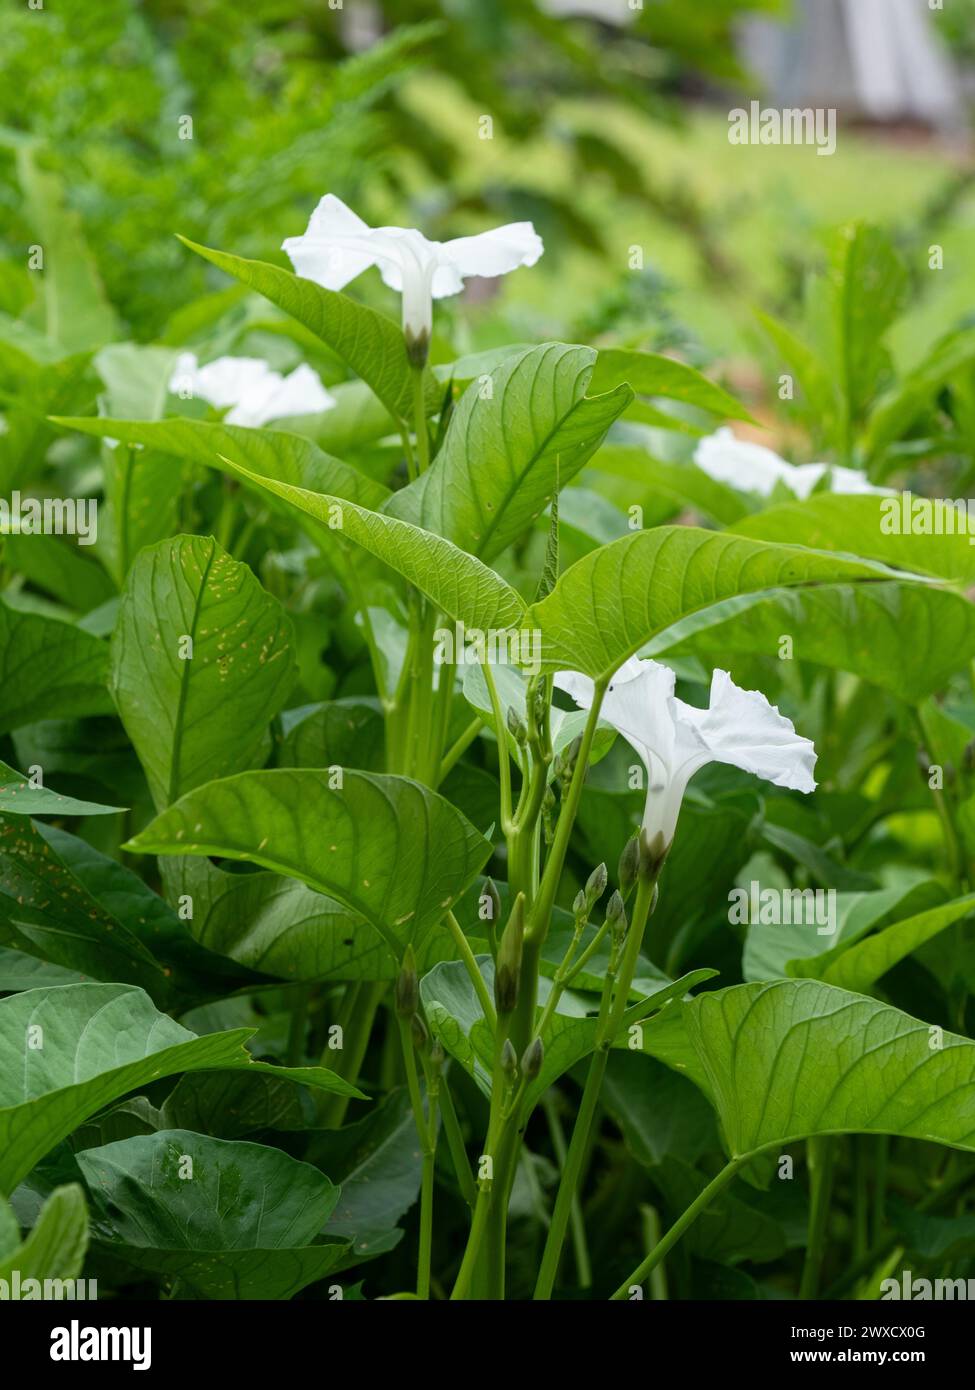 White flower blooms of the green leafy Kangkong or water Spinach growing in a vegetable garden Stock Photo